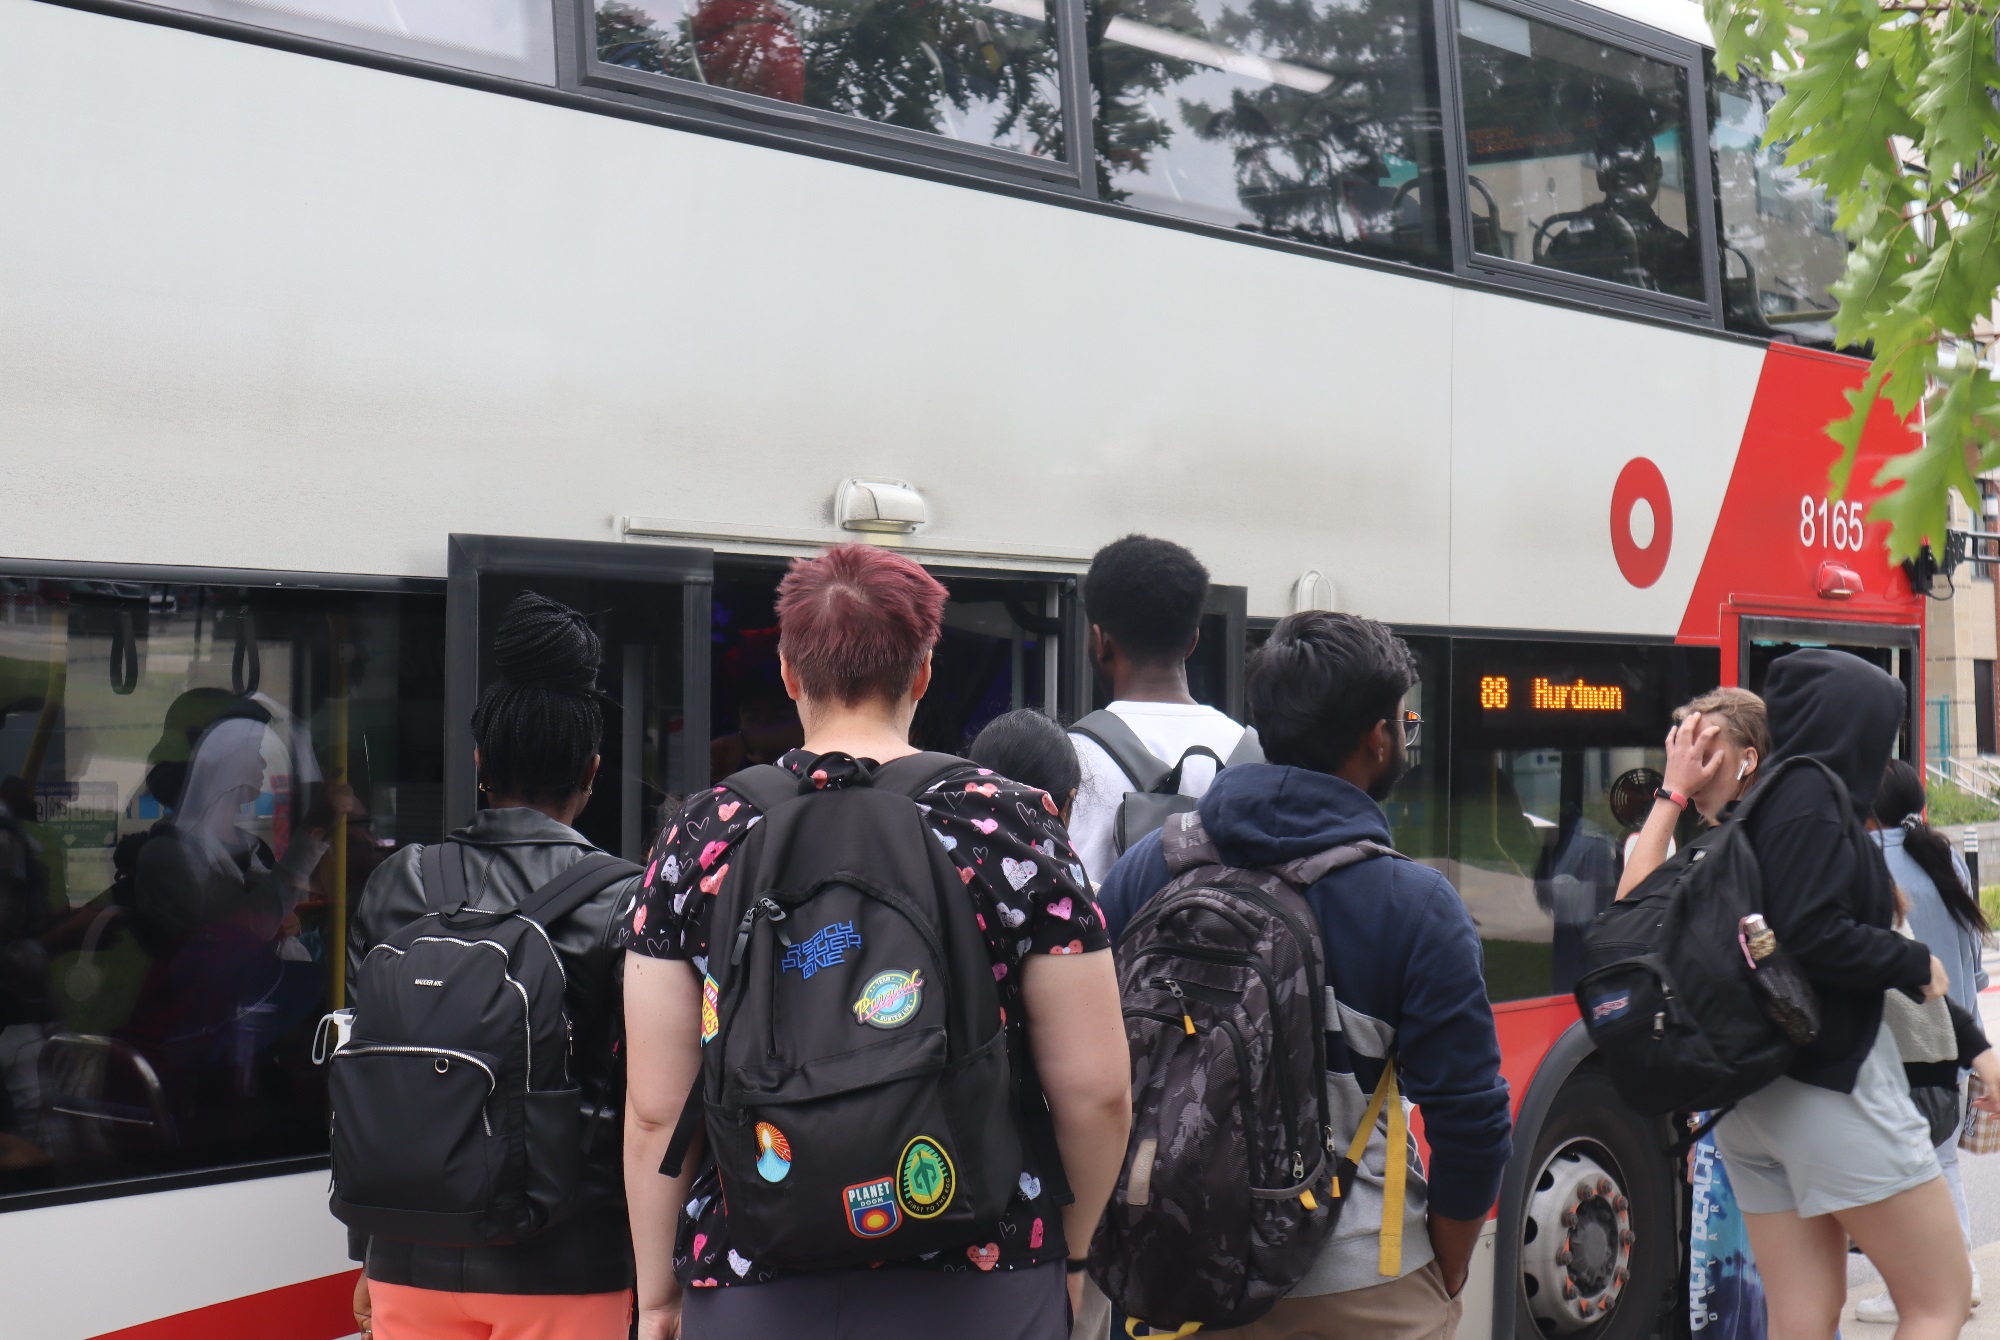 Students board an outbound bus at one of Algonquin's two bus stops, across the street from residence